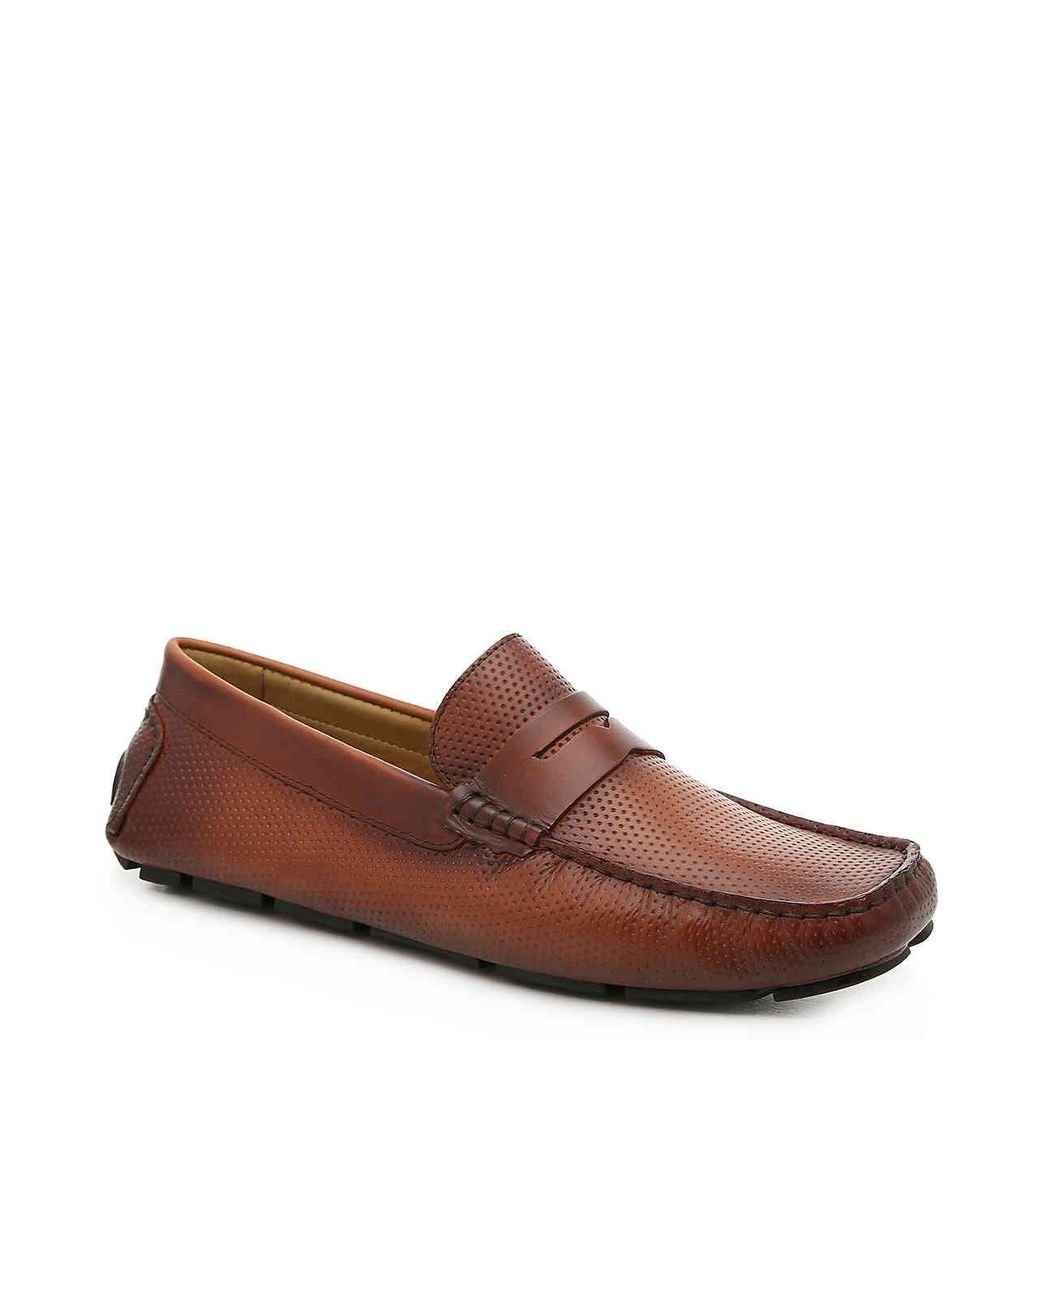 Leather 3601 Penny Loafer in Tan 